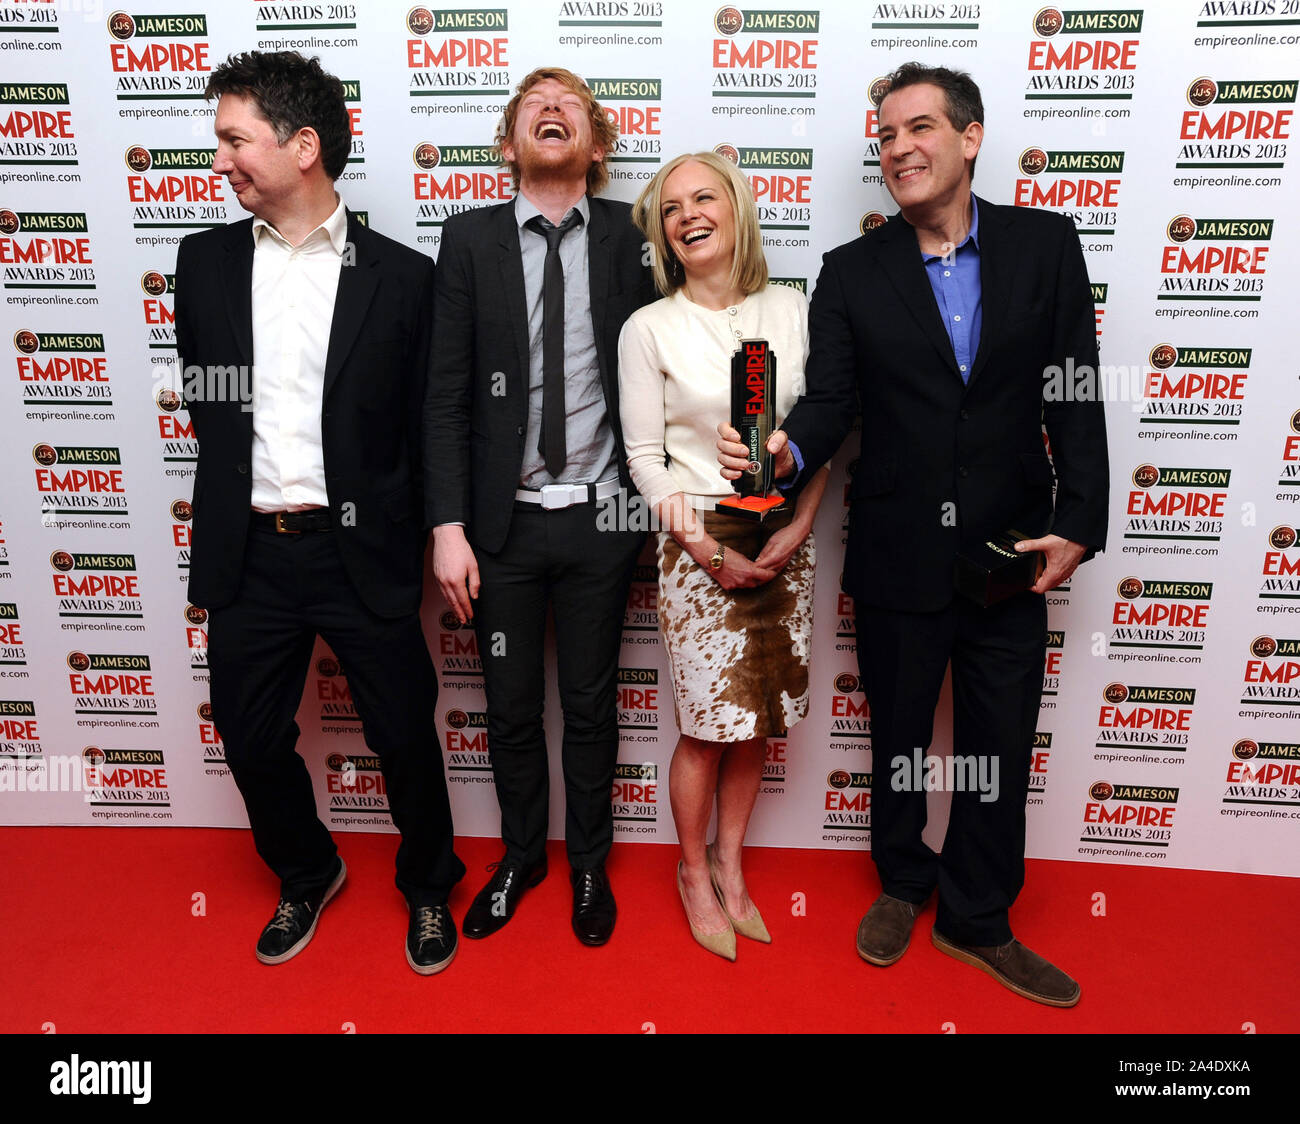 Photo Must Be Credited ©Kate Green/Alpha Press 077037 24/03/2013 Domnhall Gleeson Mariella Frostrup with Andrew Macdonald and Allon Reich Jameson Empire Film Awards 2013 Grosvenor Hotel London Stock Photo